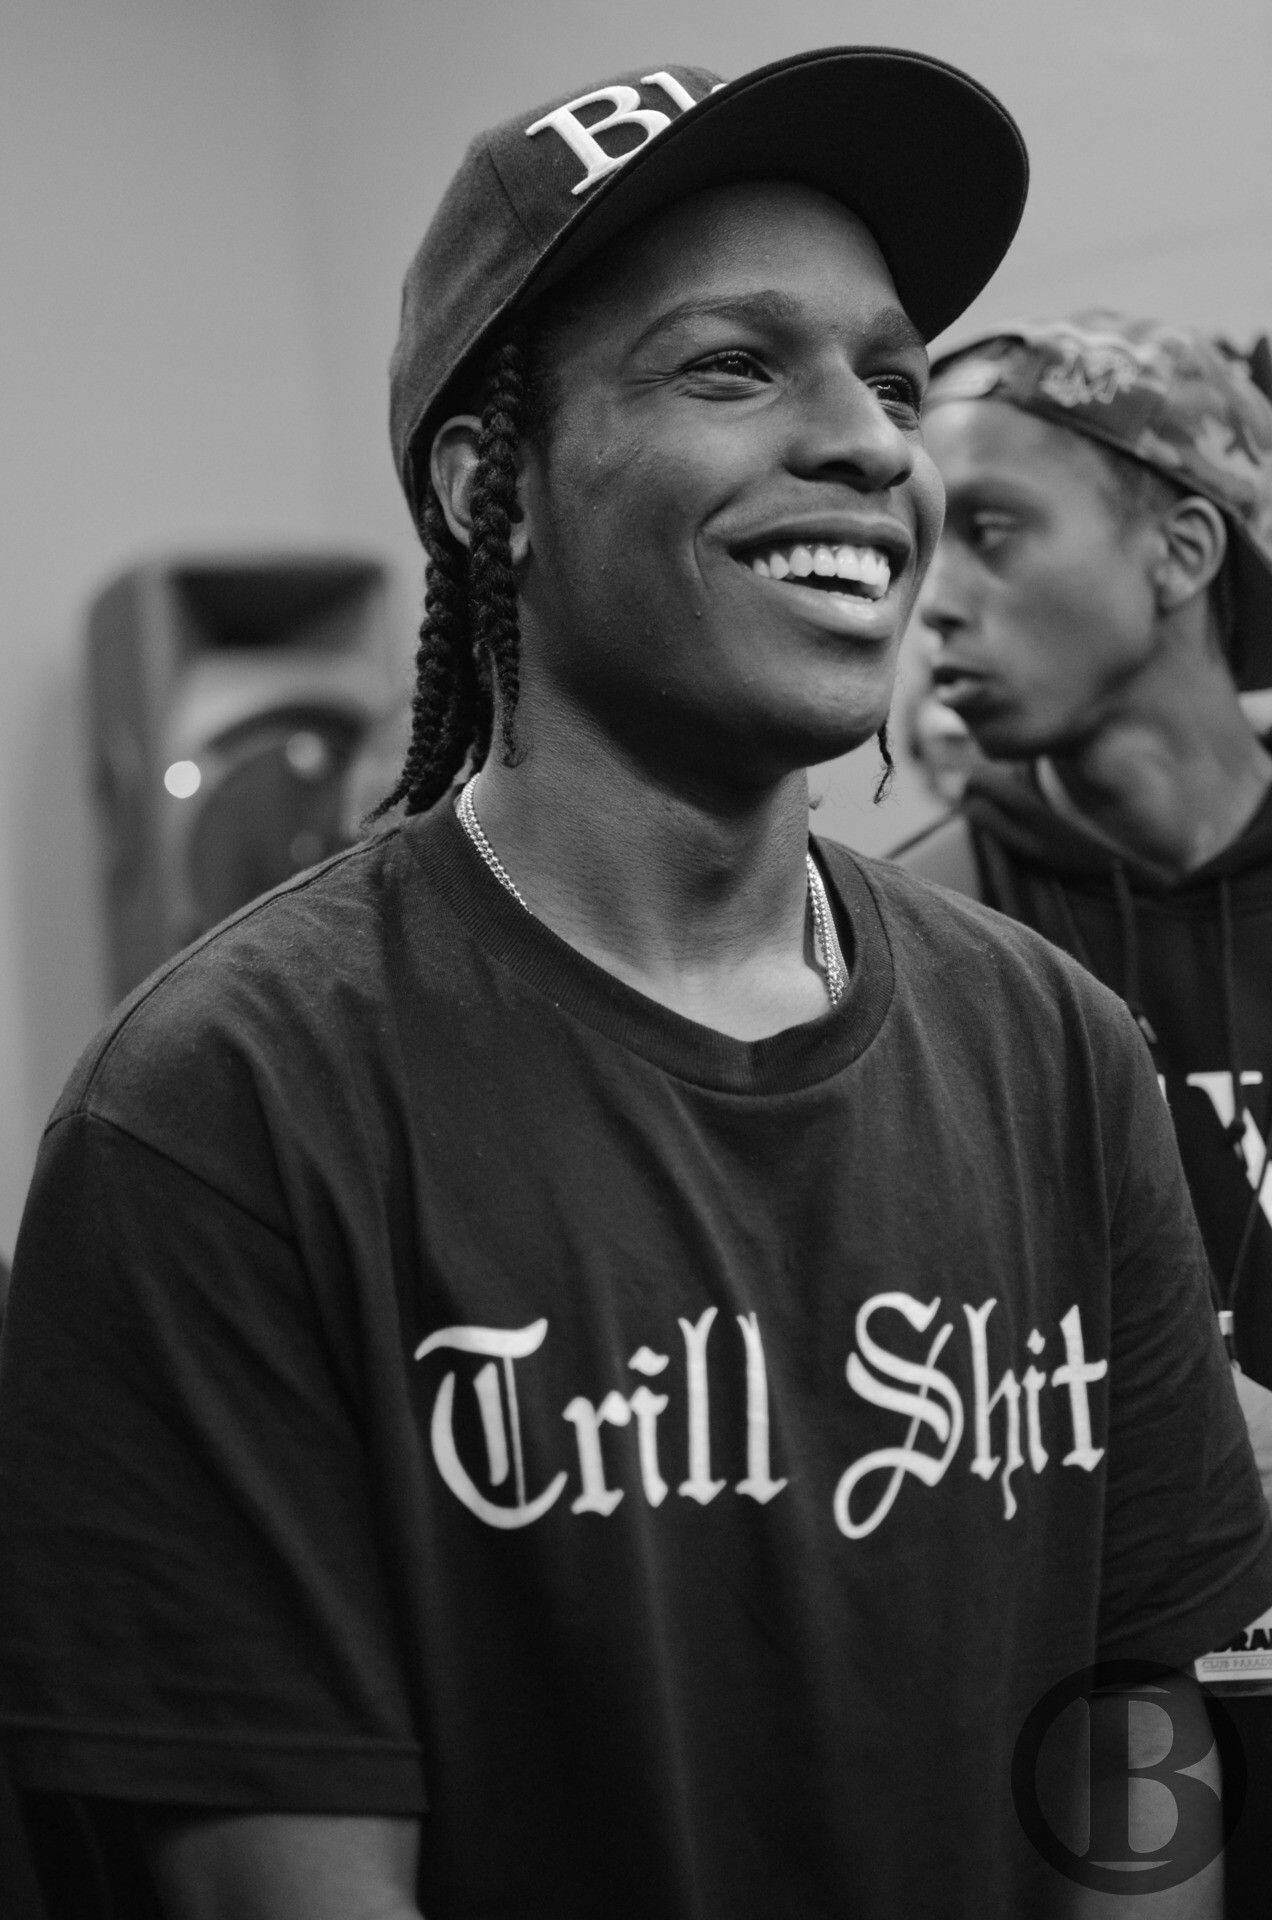 A Candid Photo Of Asap Rocky Looking Dashing. Background